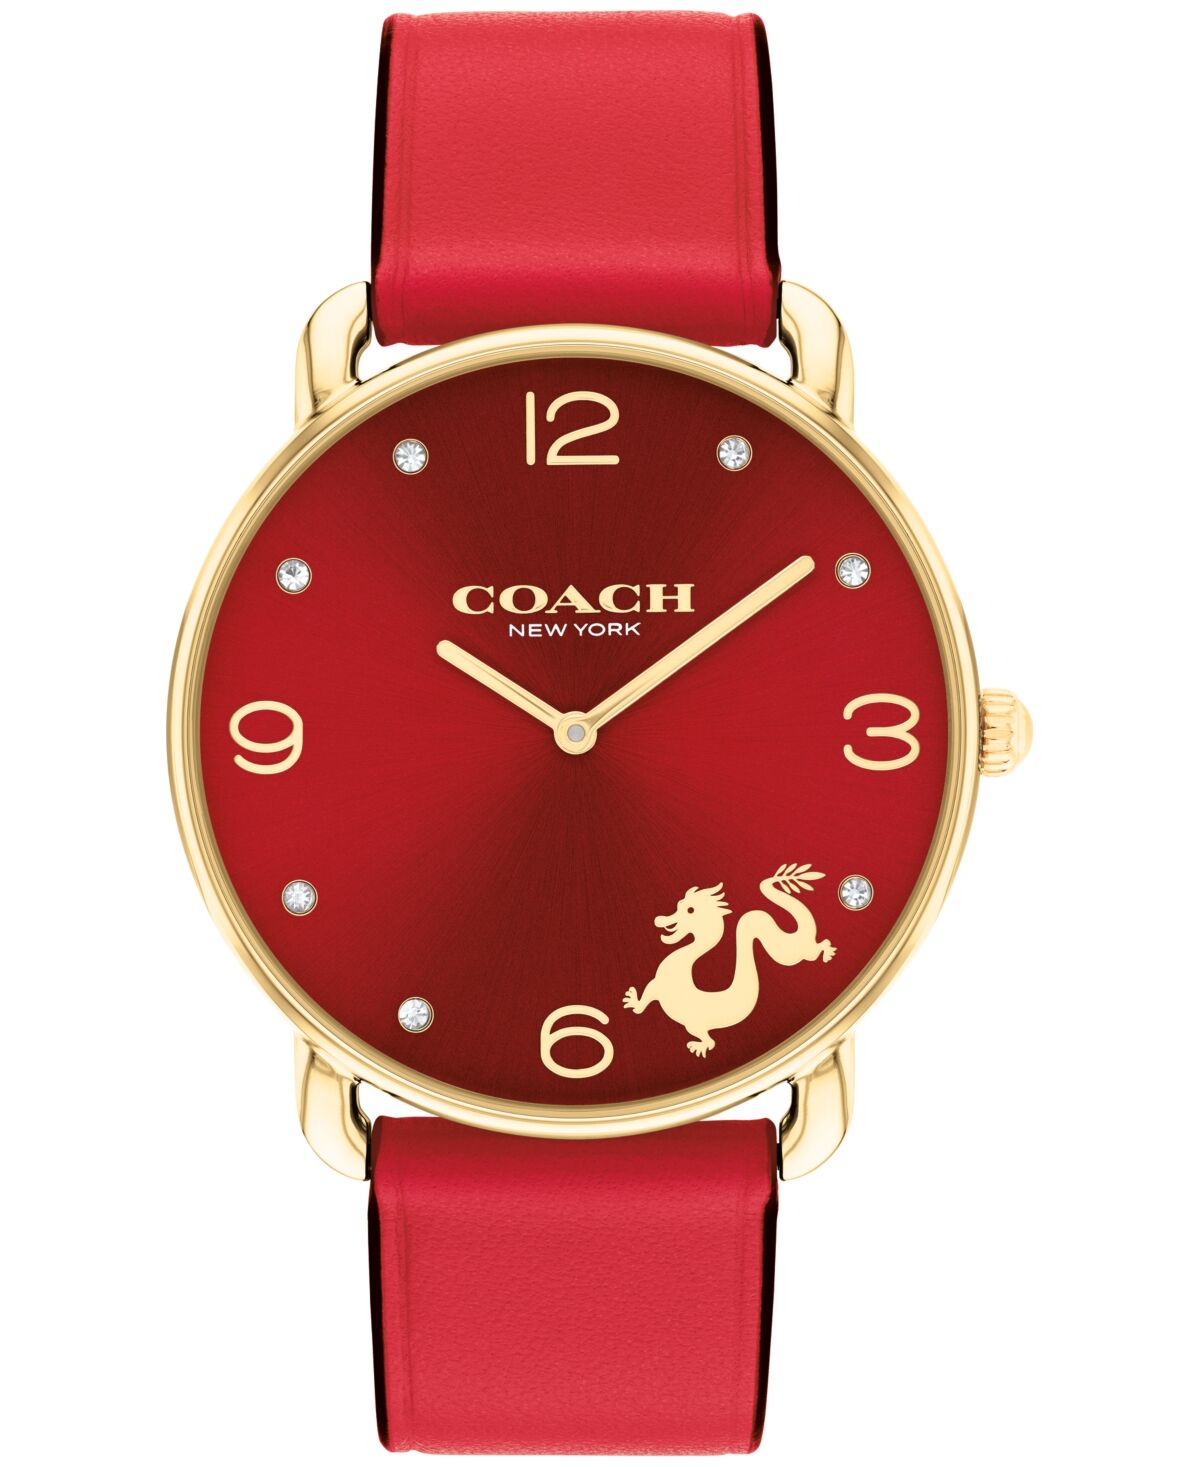 Coach Women's Elliot Lunar New Year Red Leather Strap Watch 36mm - Red